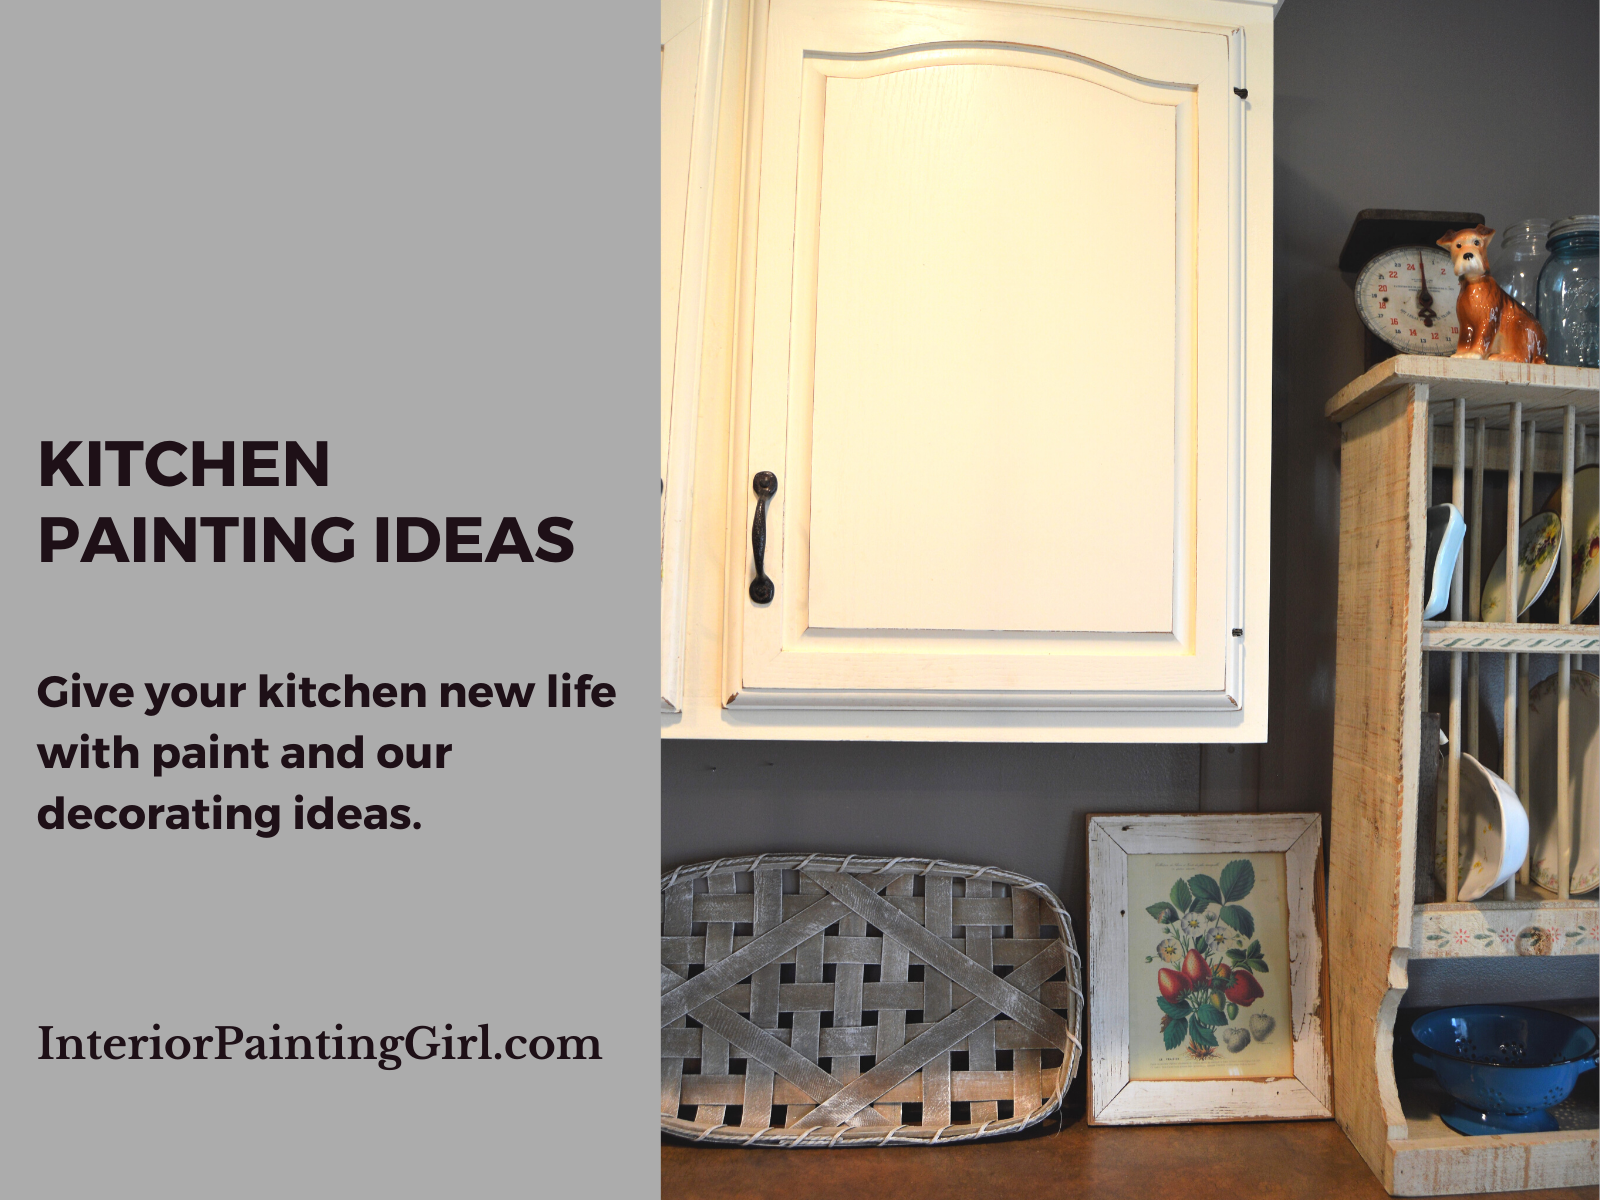 Kitchen Painting Ideas from That Interior Painting Girl